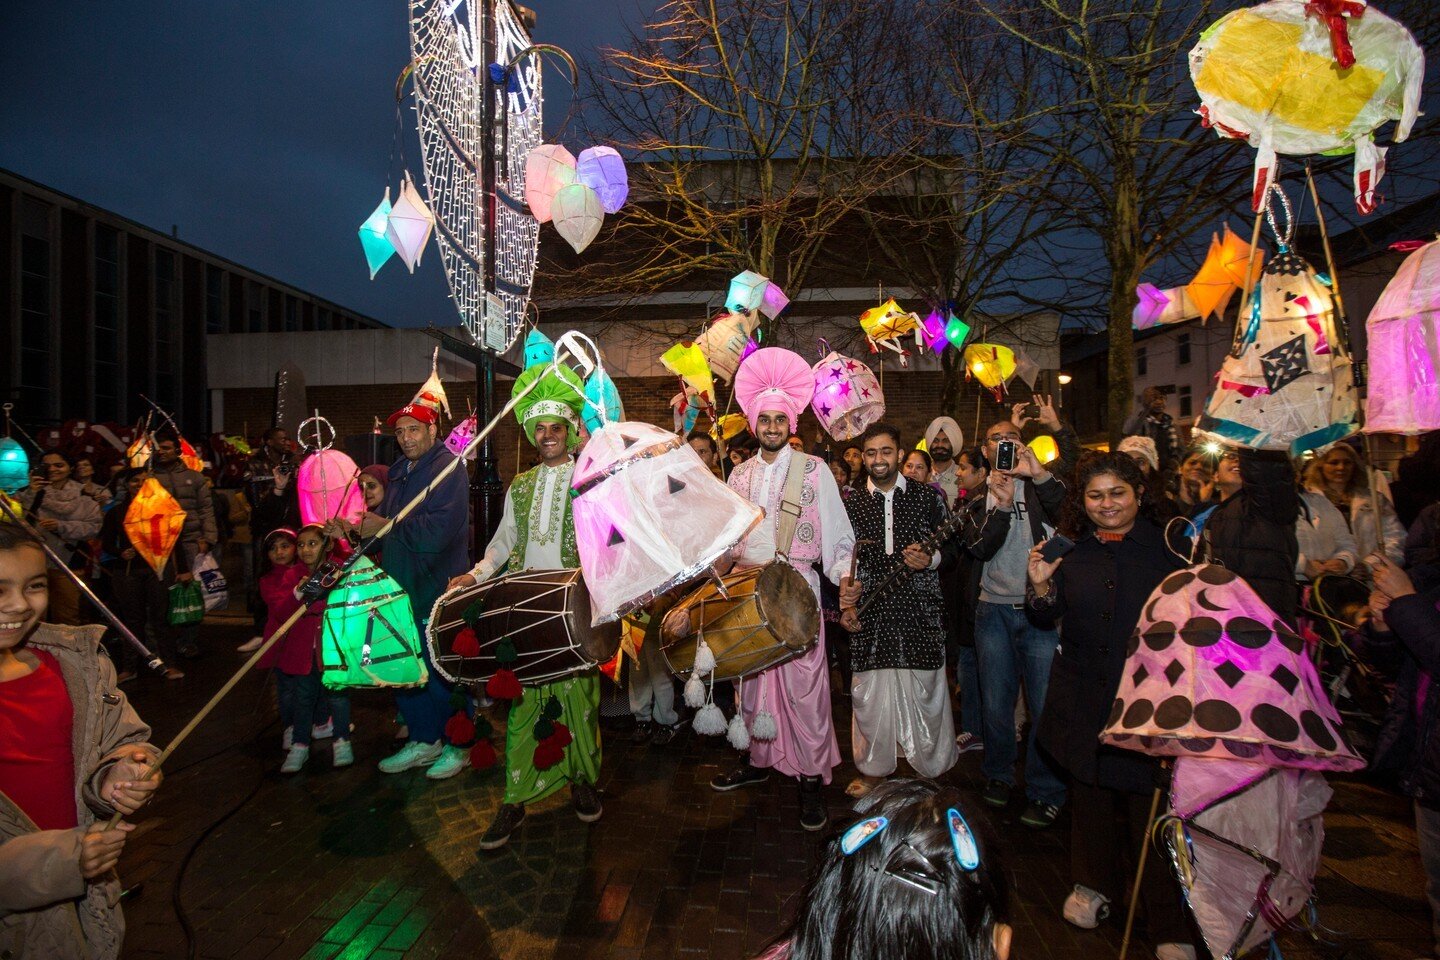 This Saturday come down to Bell Square for our last event of the season, WINTER LIGHTS! 🔔

Hounslow comes together in our annual celebration of the beginning of the festive season. Join the lantern parade and procession, including the turning-on of 